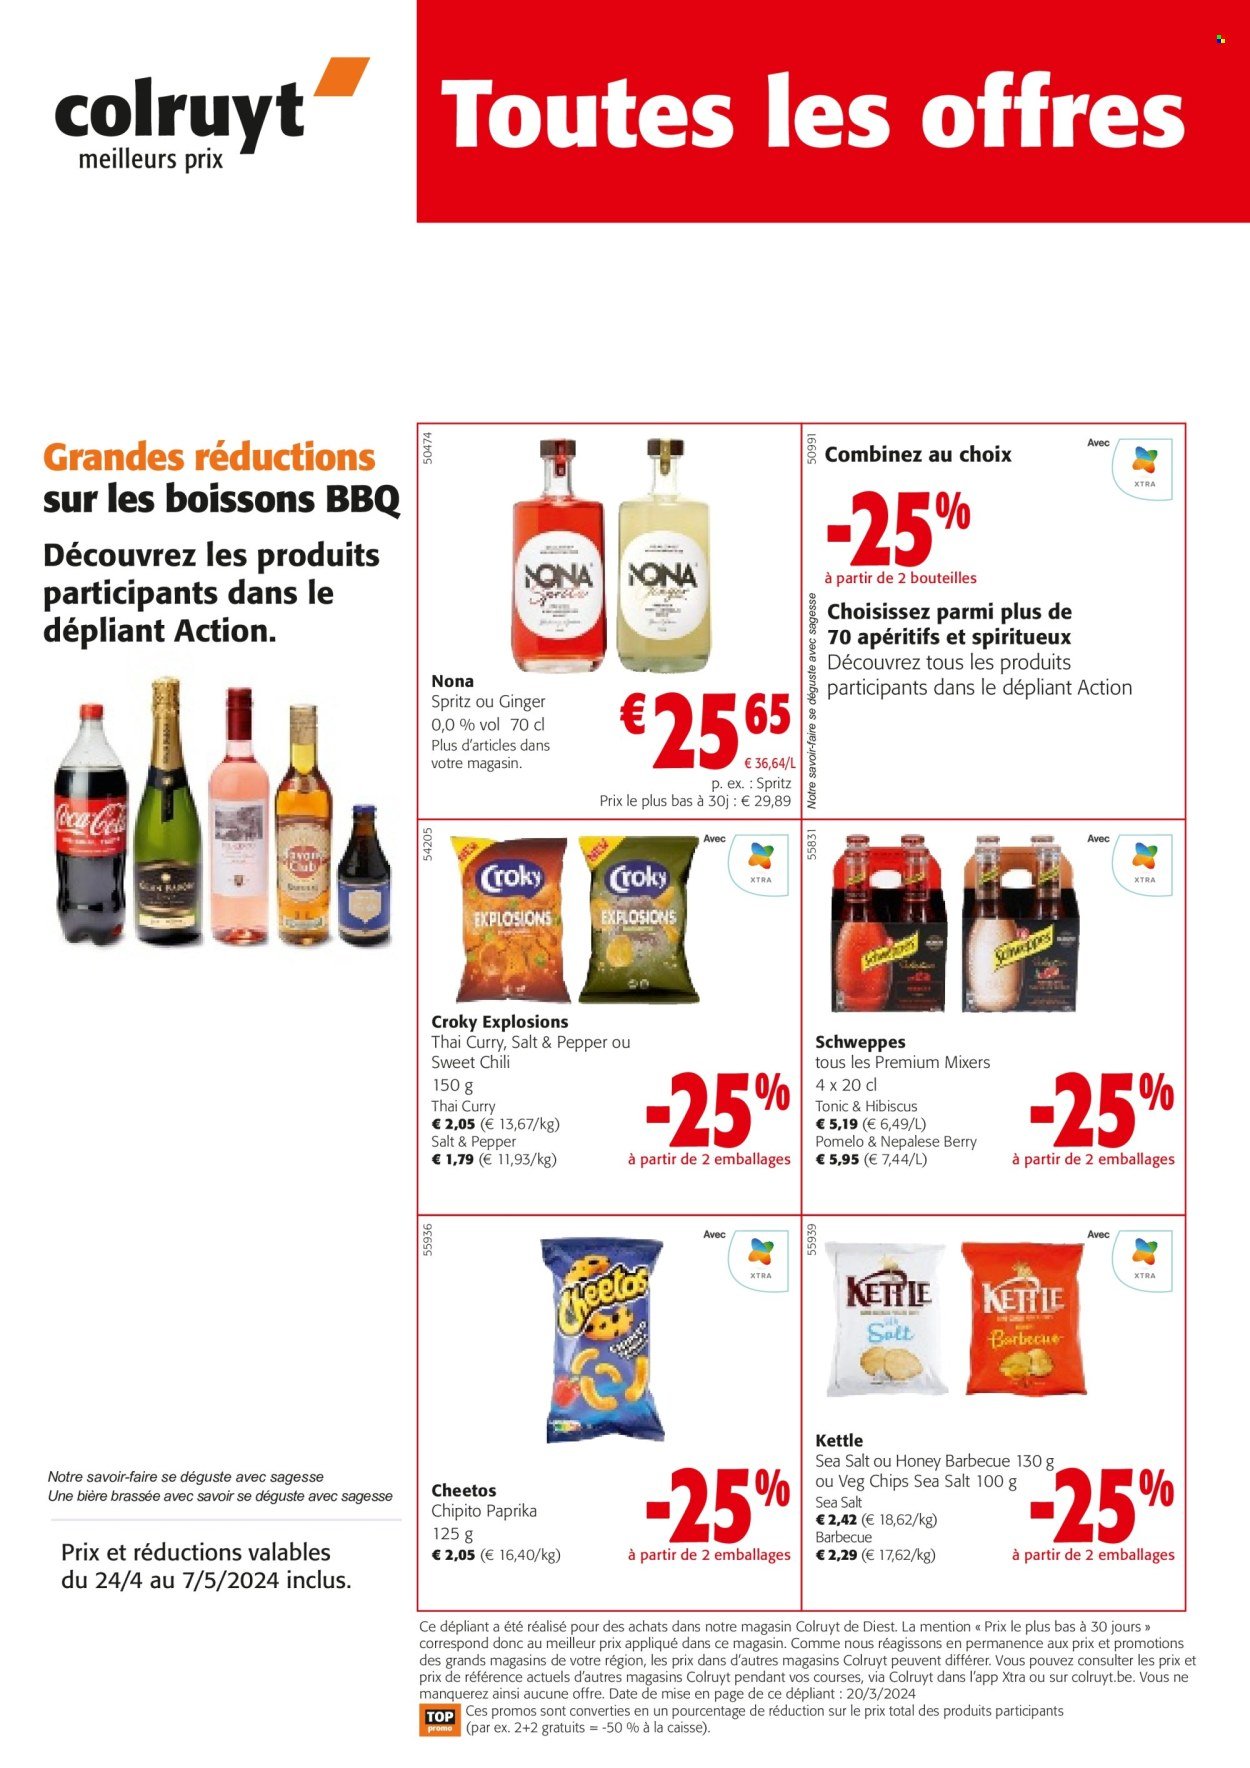 thumbnail - Colruyt-aanbieding - 24/04/2024 - 07/05/2024 -  producten in de aanbieding - paprika, cheetos, chips, curry, sweet chili sauce, BBQ, Schweppes. Pagina 1.